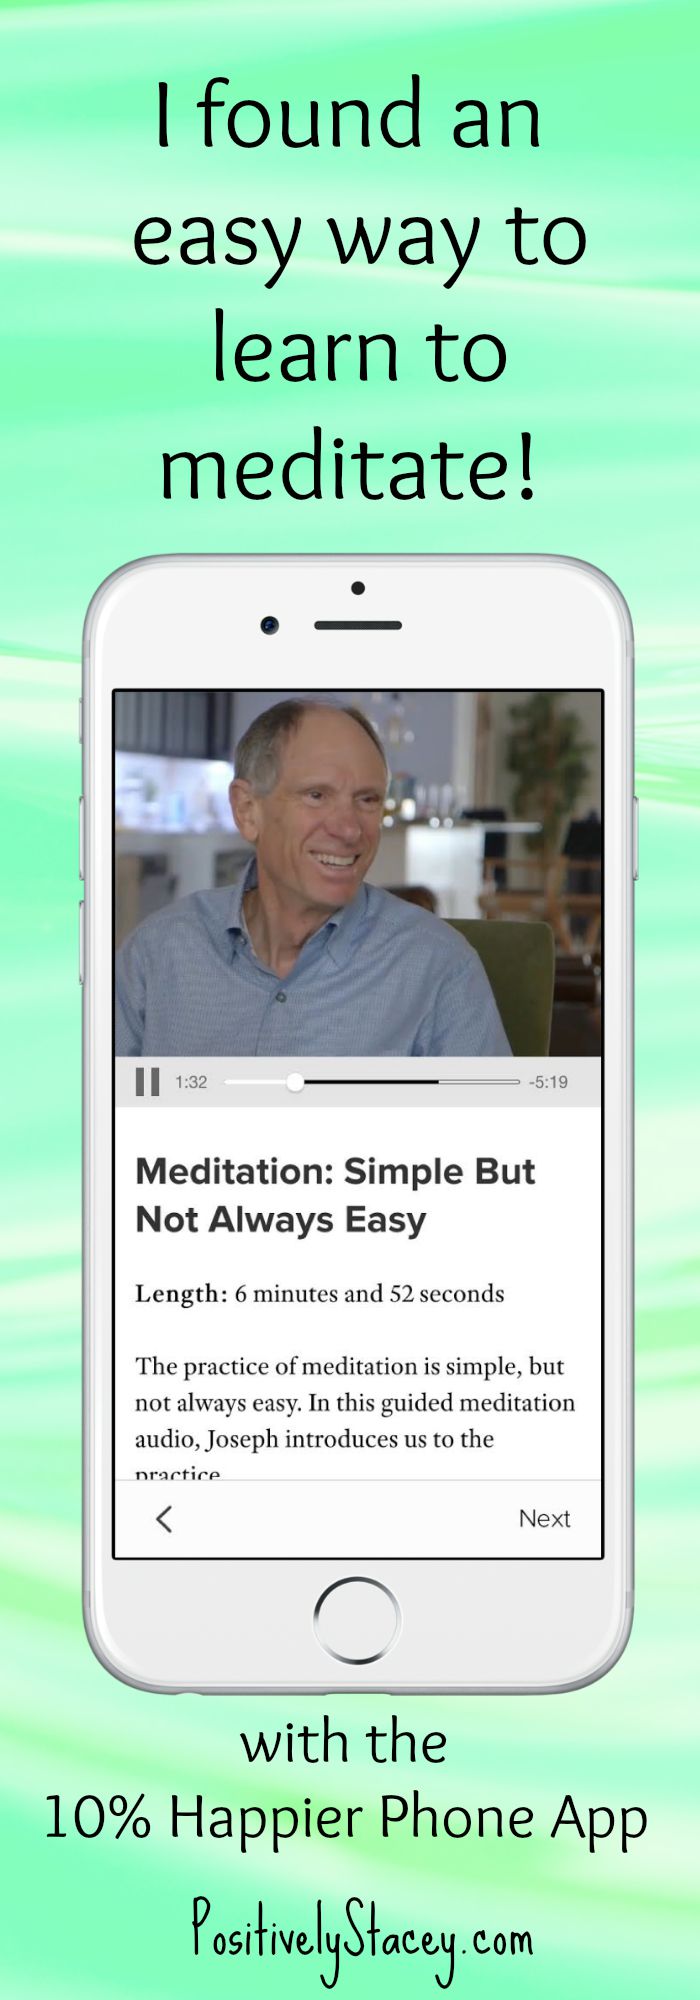 I Found an easy way to learn meditation! Check it out - it's a phone app. It really works!